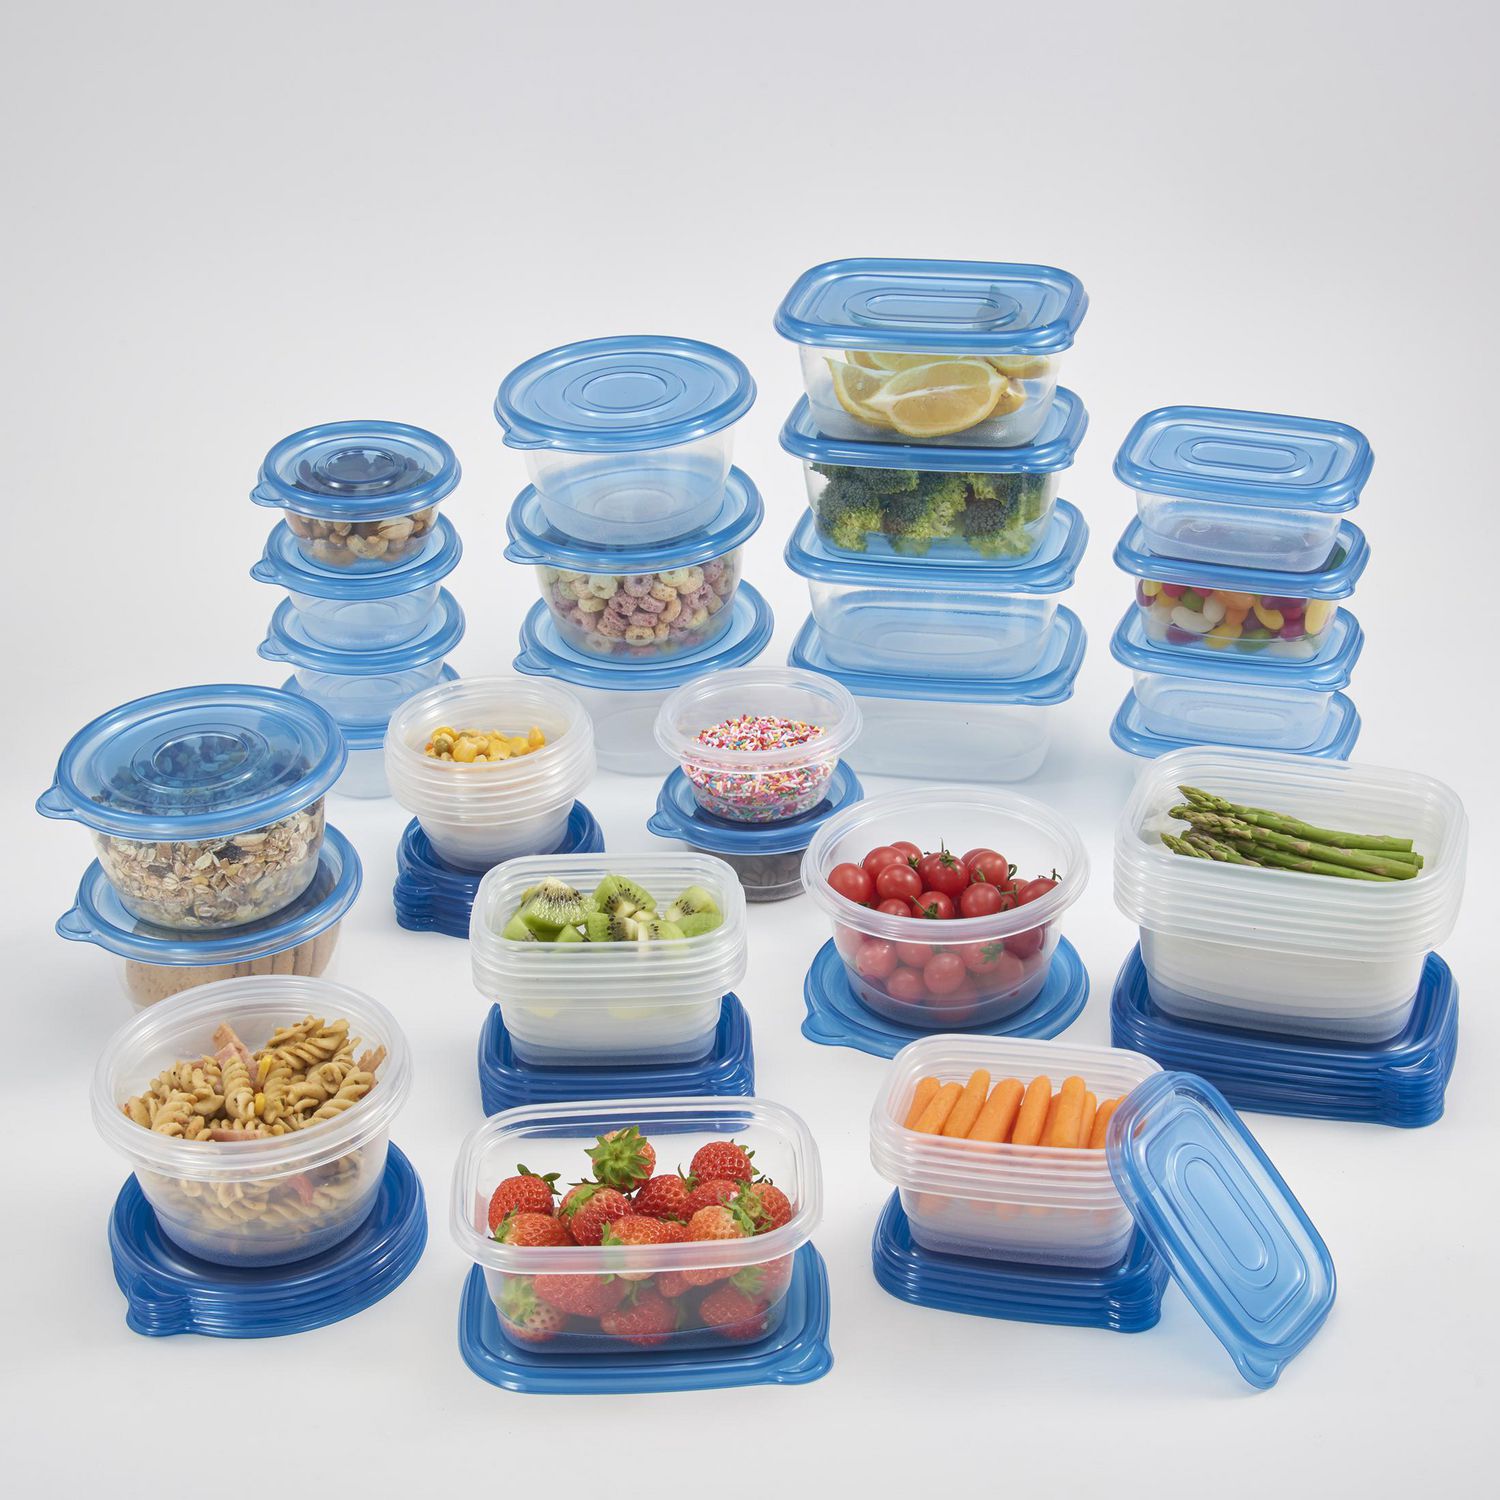 Mainstays 92PC Food Storage Containe, 92PC Food Storage Container Set 